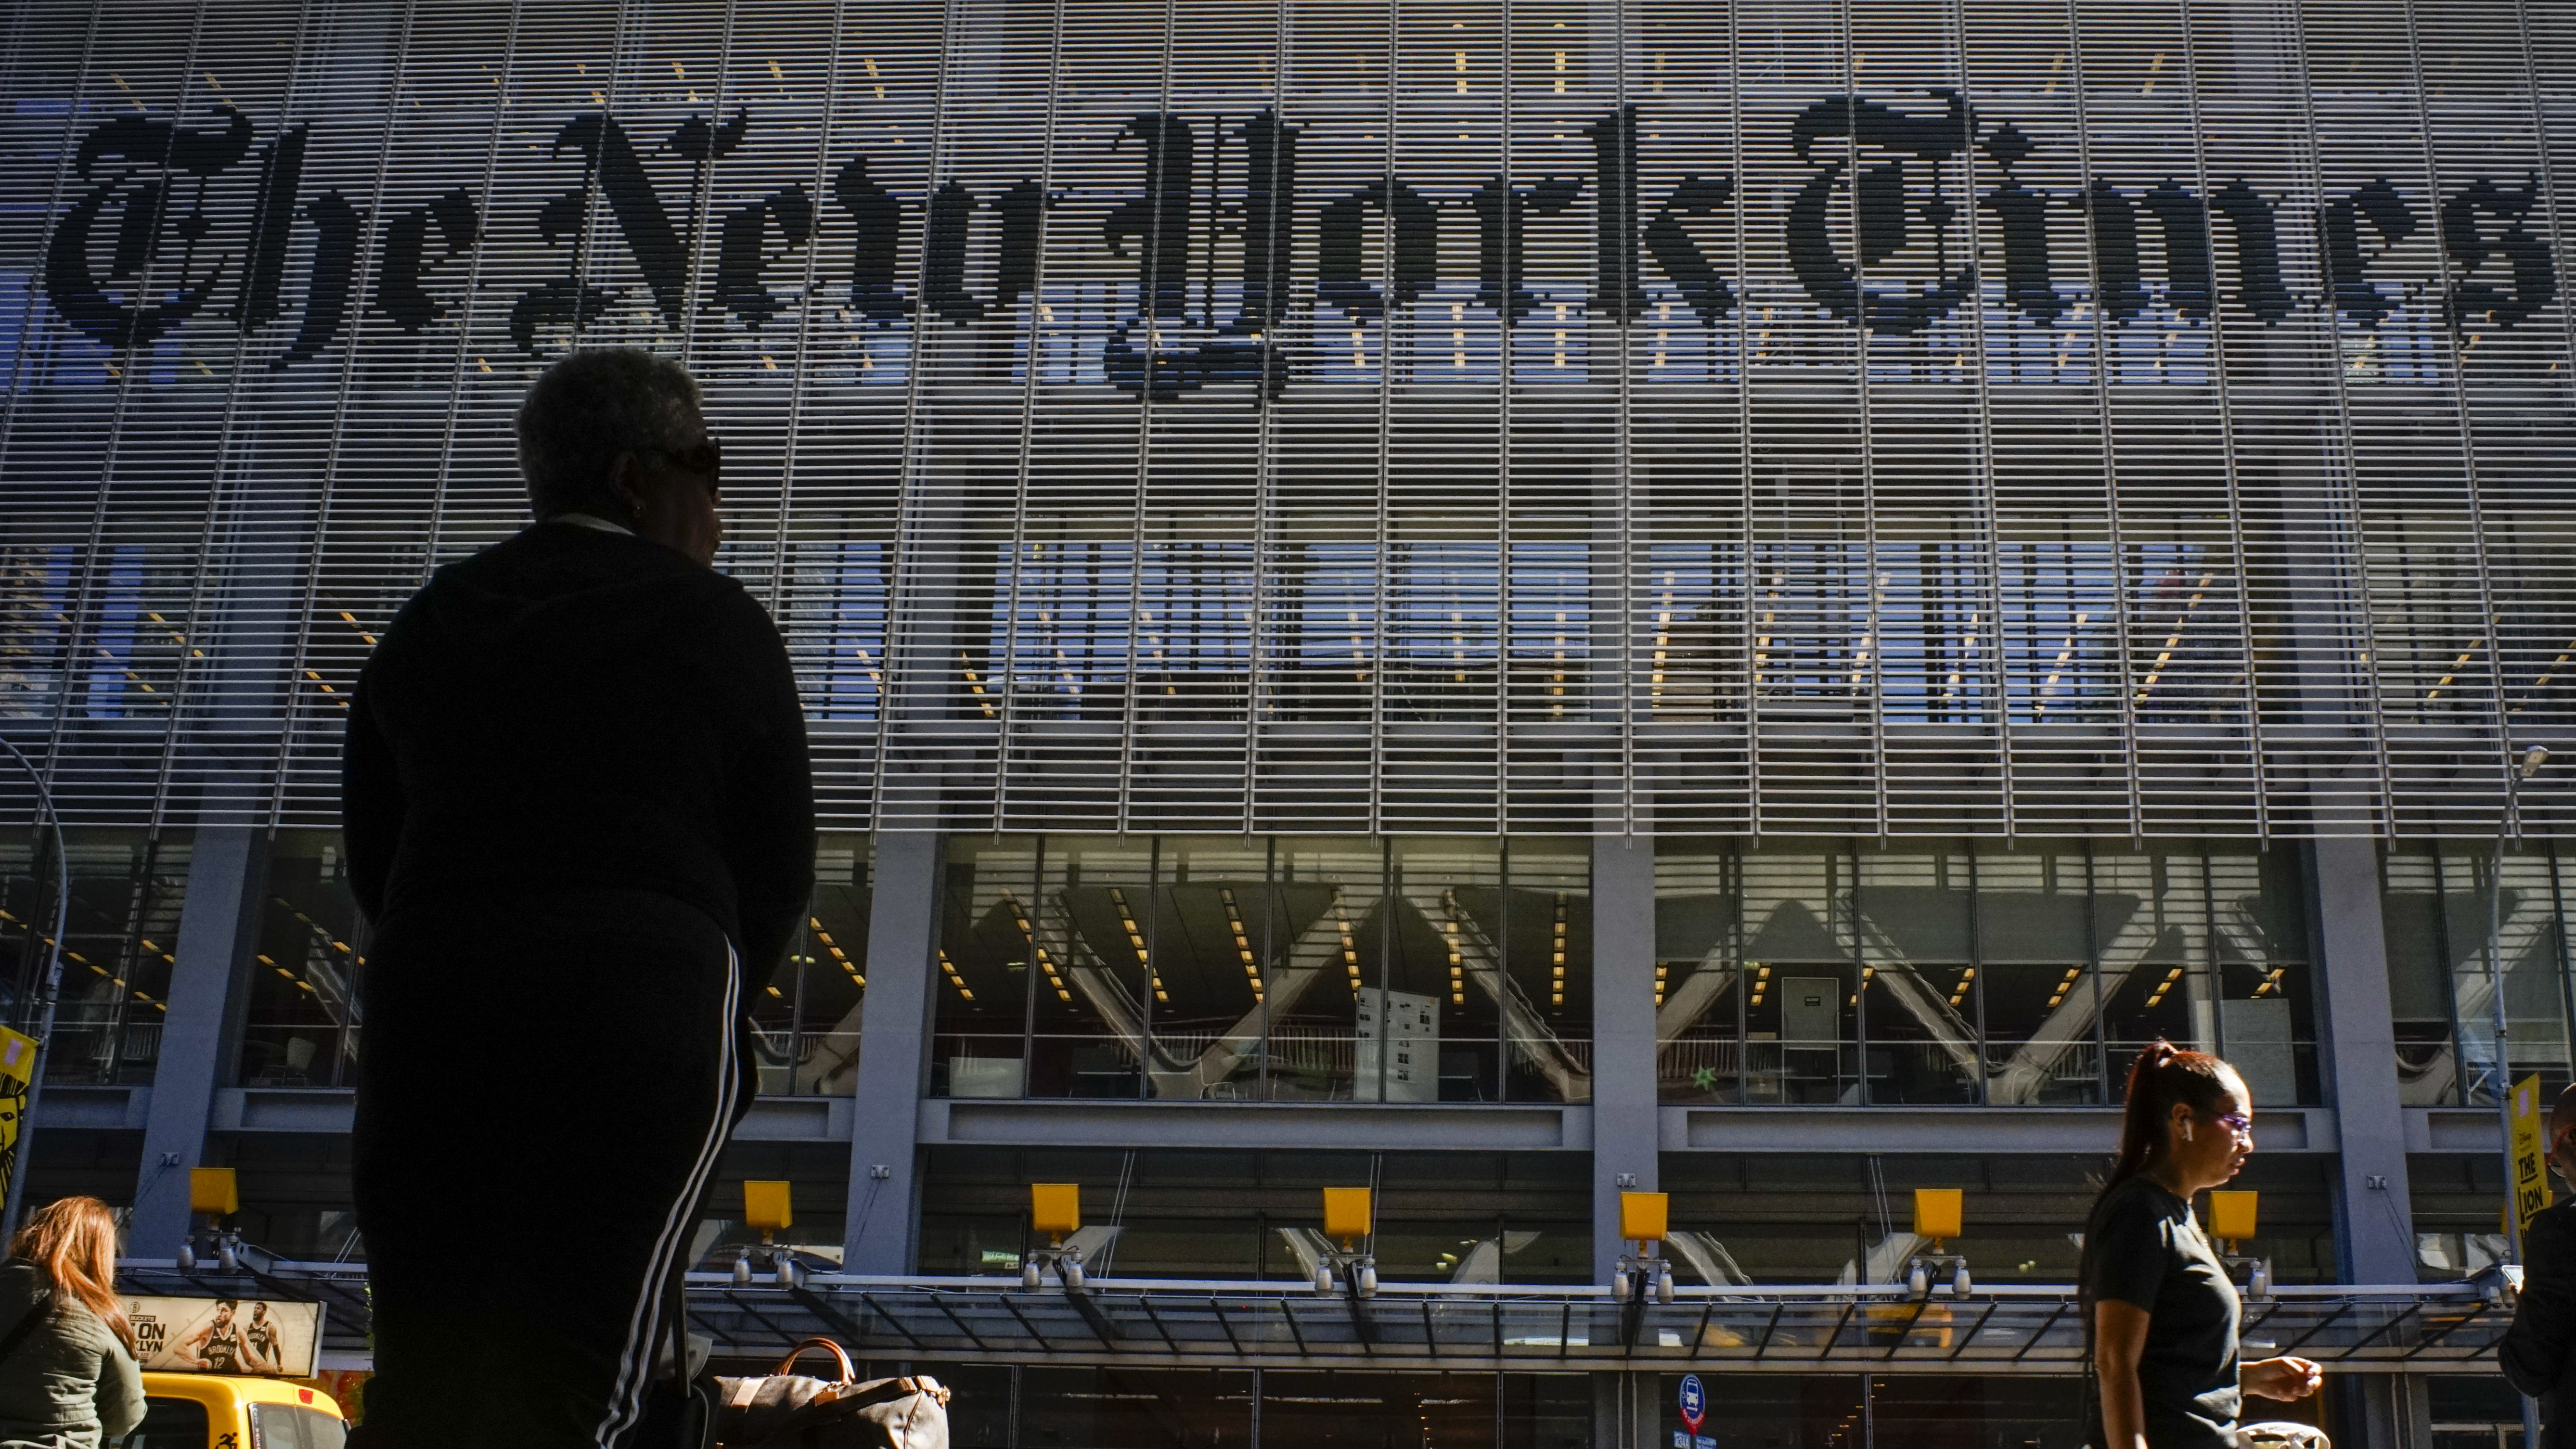 NEW YORK, USA - October 14: People walk along 8av as the New York Times building is seen at the background on October 14, 2019 in New York, USA. NY Times on Sunday evening, published a story titled, "Macabre Video of Fake Trump Shooting Media and Critics Is Shown at His Resort." The video showed the president as a mass shooter where he is executing media and his political opponents inside church. It was dysplayed at a pro Trump conference in Miami. NY Times is an American newspaper based in New York City with worldwide influence,  the paper has won 127 Pulitzer Prizes,  being ranked 18th in the world by circulation.(Photo by Eduardo MunozAlvarez/VIEWpress/Corbis via Getty Images)